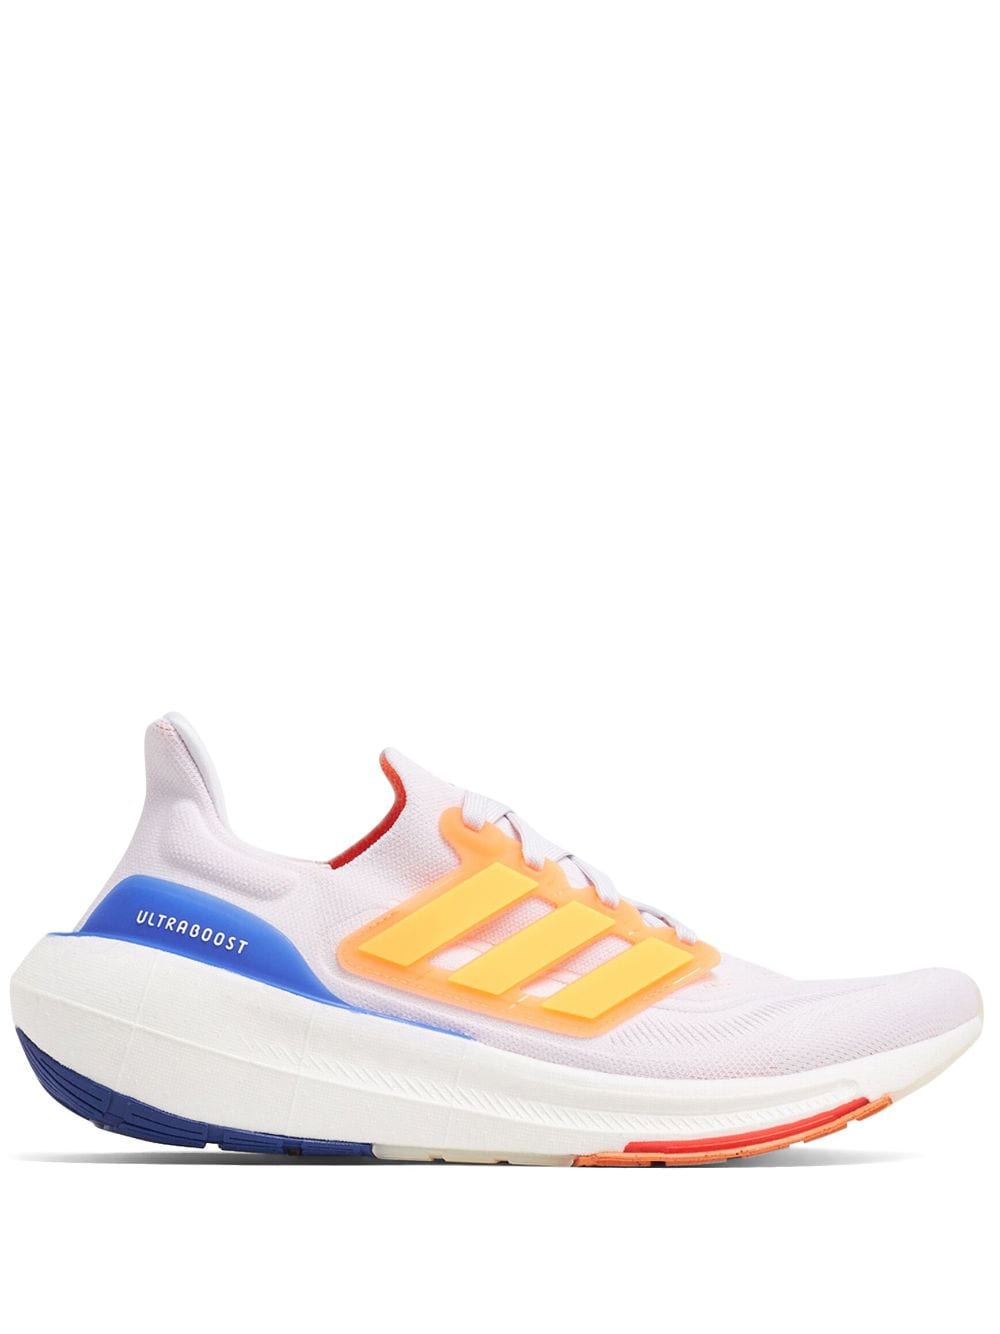 adidas Ultraboost Light low-top sneakers - White von adidas